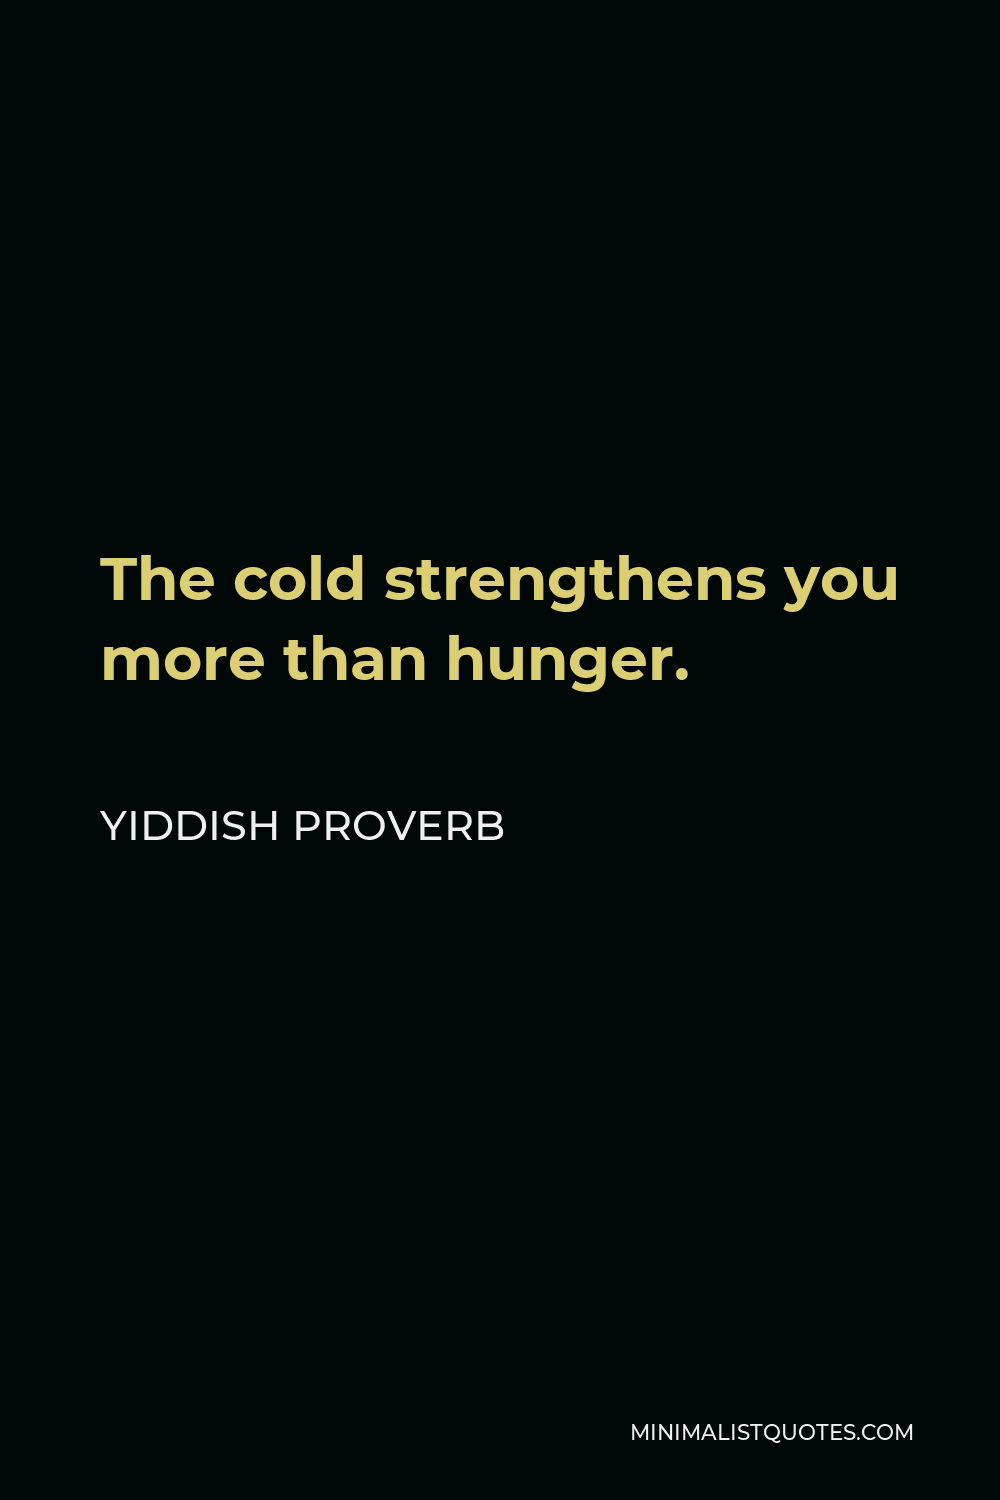 Yiddish Proverb Quote - The cold strengthens you more than hunger.